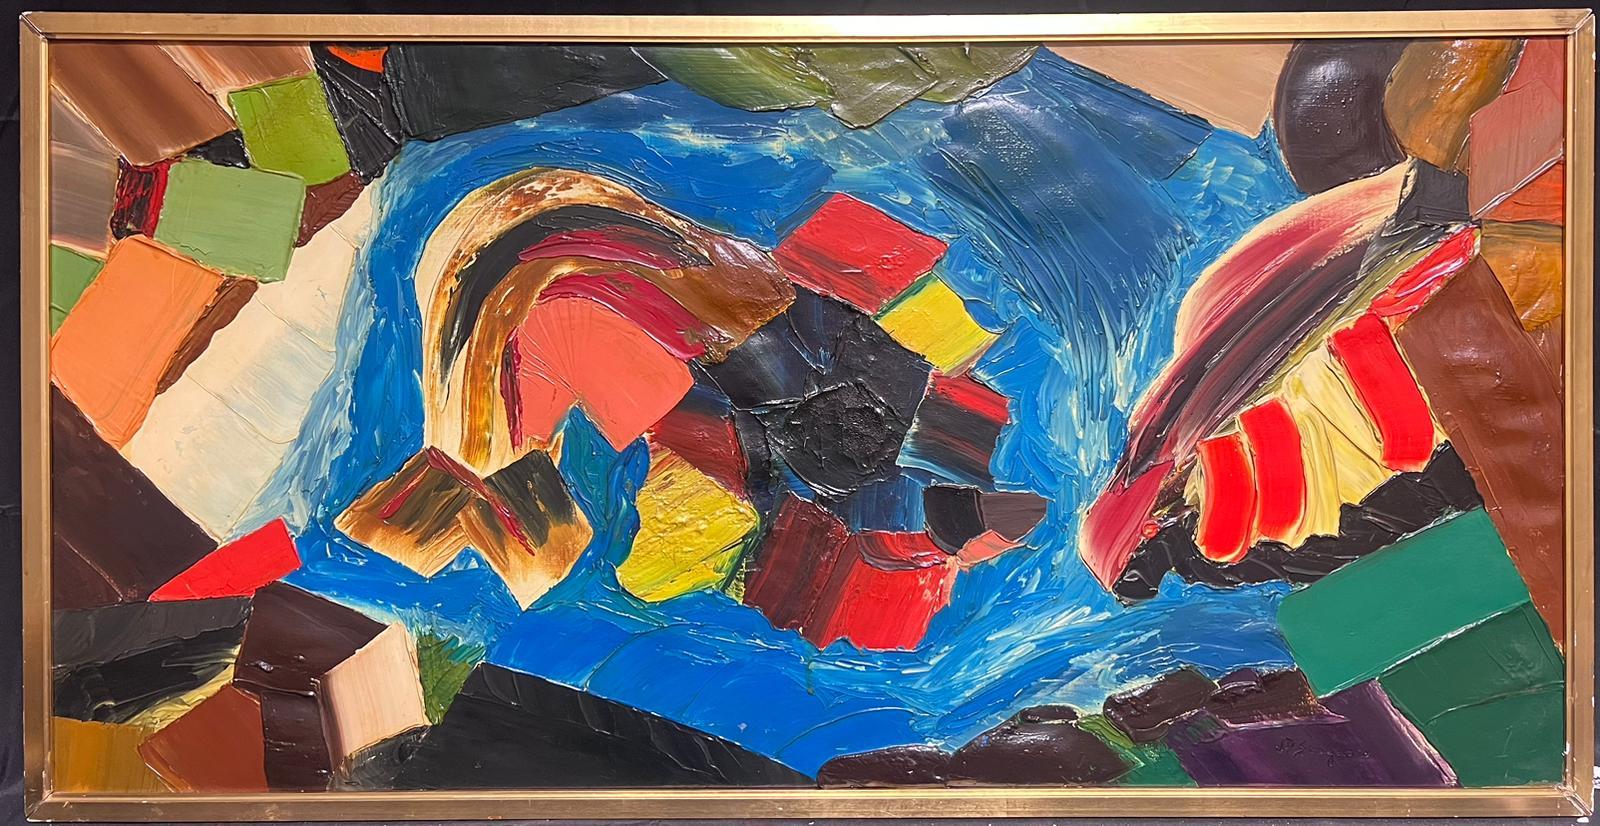 
by Jean Pierre Stagnaro (1927 - 2013)
signed
inscribed verso
signed oil on canvas, framed
framed: 25 x 48 inches
canvas: 24.75 x 47.75 inches
provenance: private collection, France; Salon exhibition label verso too. 
condition: very good and sound